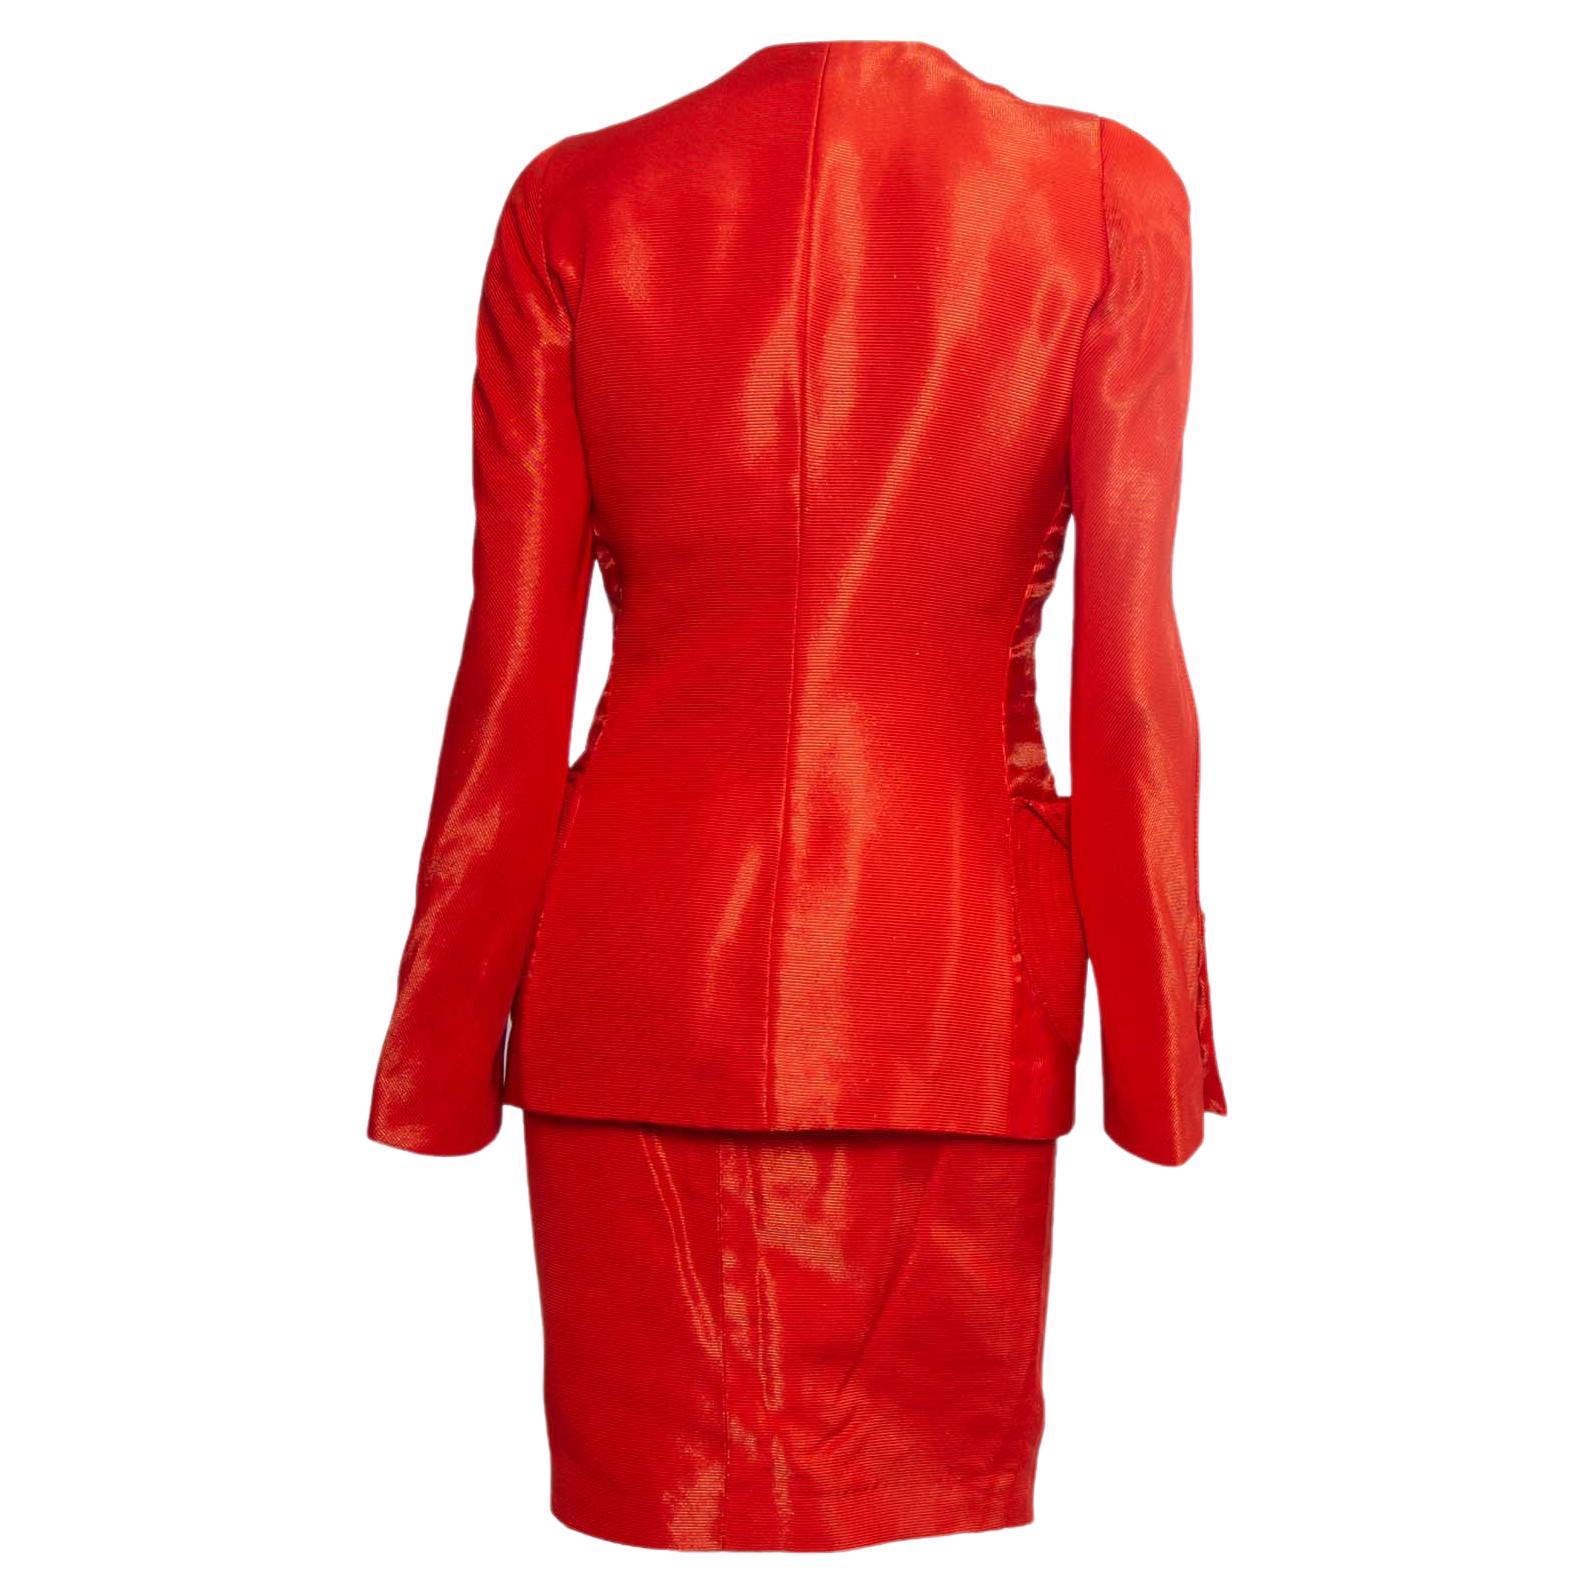 Presenting a bright orange runway skirt suit masterpiece, designed by Gianni Versace. This skirt suit was debuted as look 11 on the Gianni Versace S/S 1991 runway. Metallic threading creates a shiny effect throughout. The blazer creates an hourglass